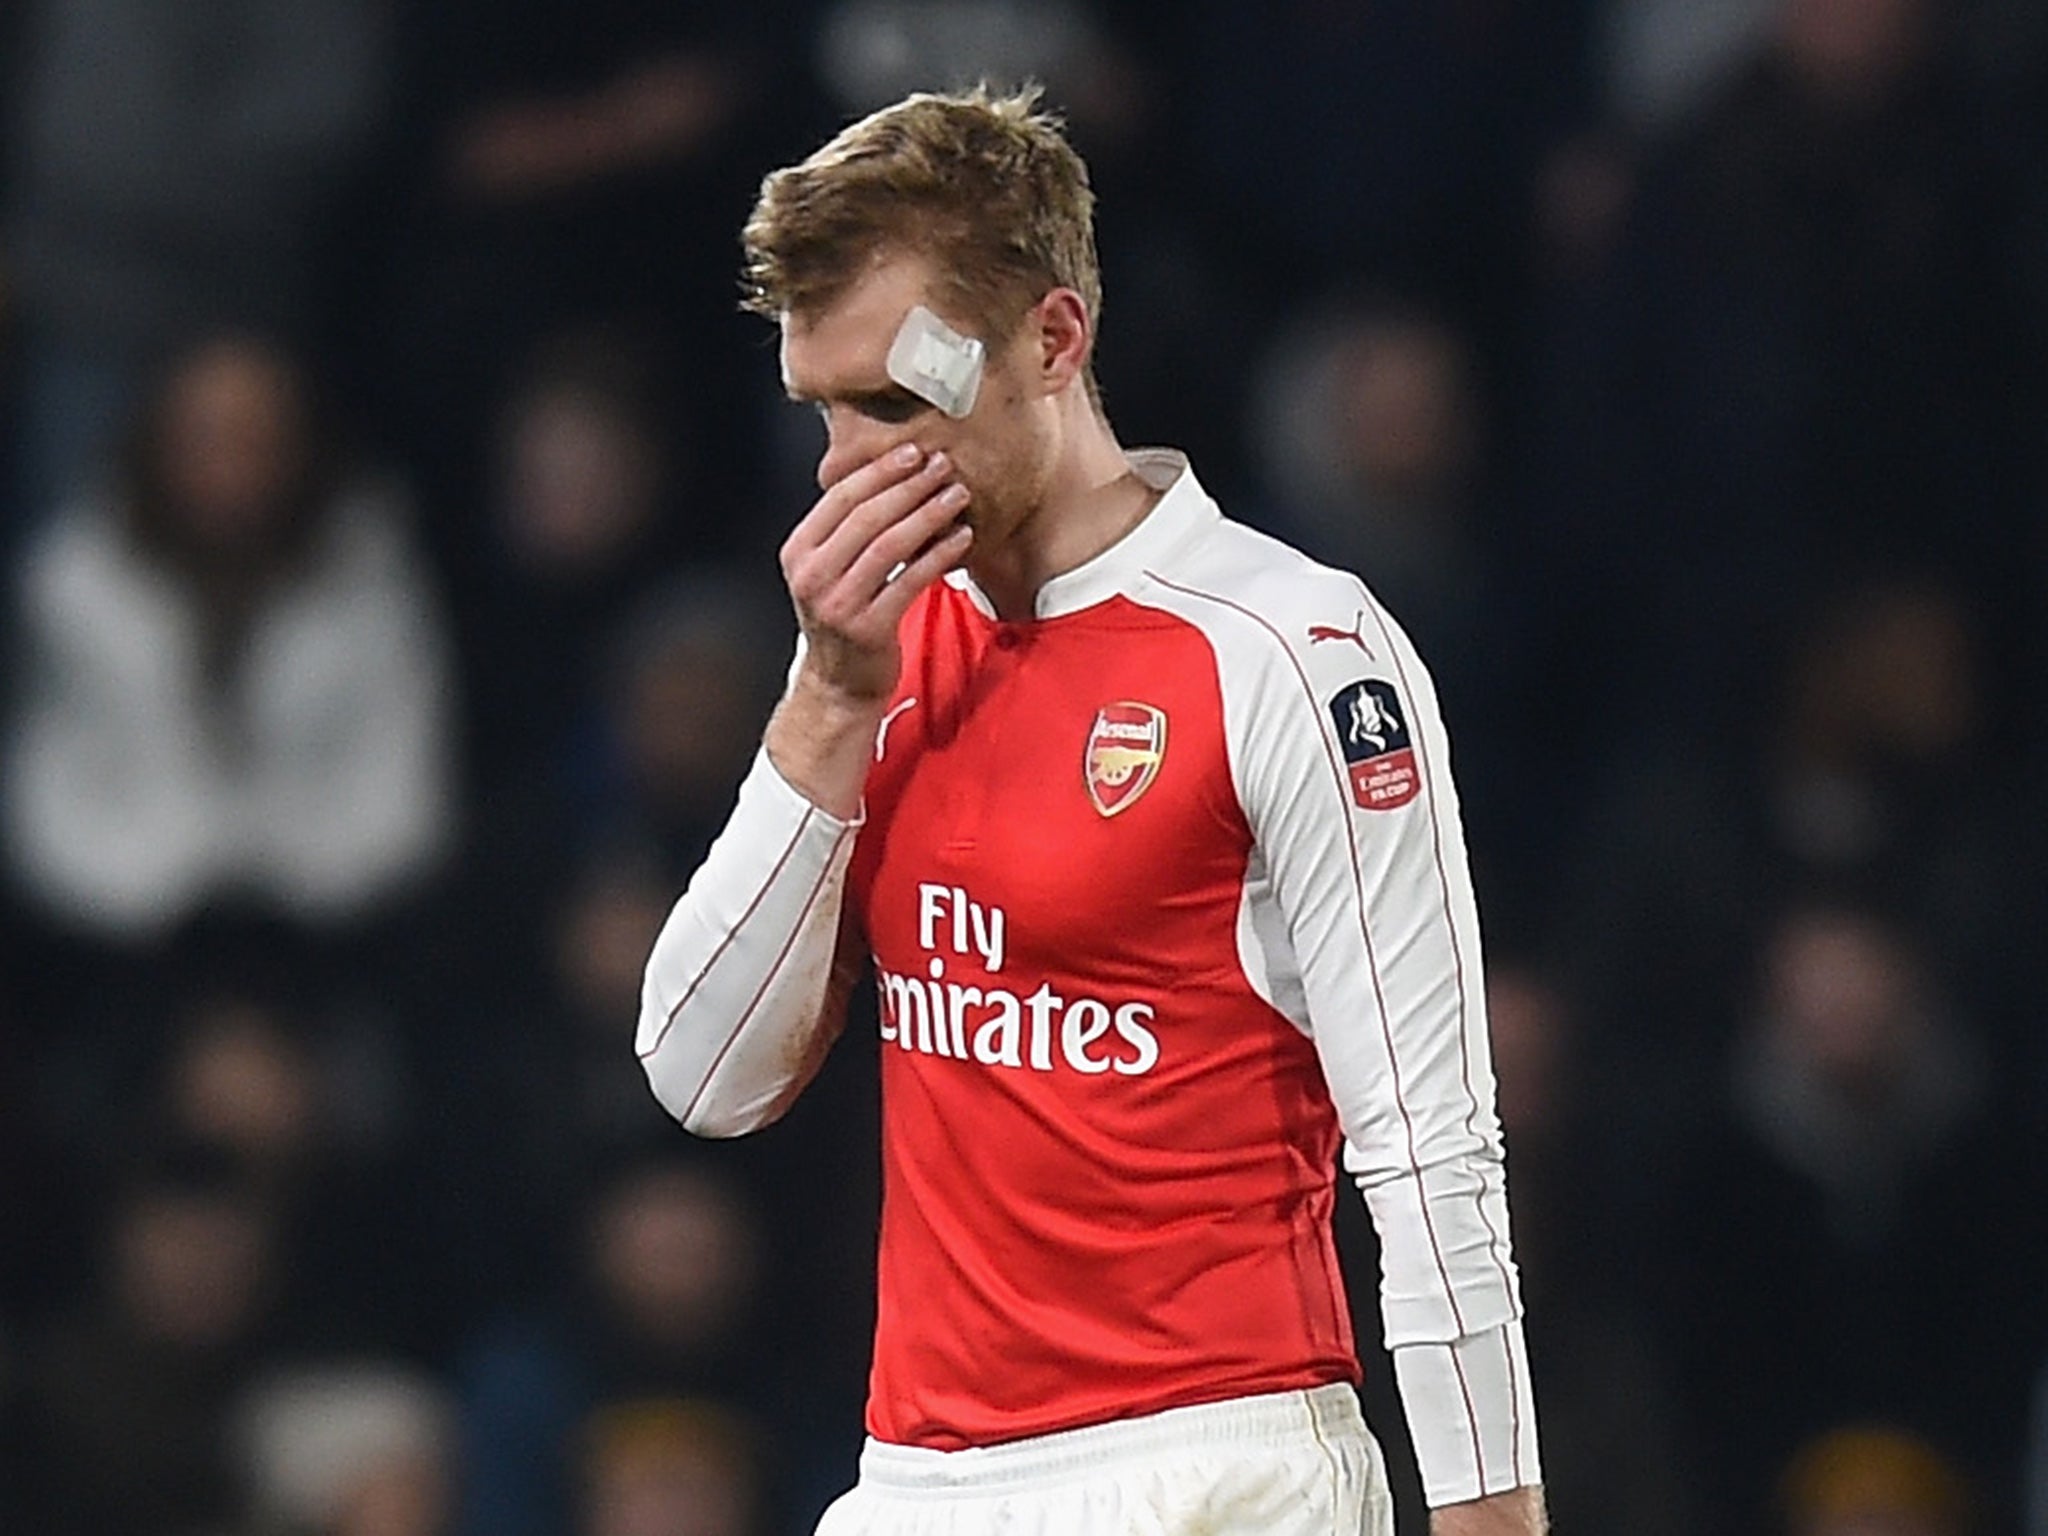 Arsenal centre-back Per Mertesacker will miss the start of the season with injury